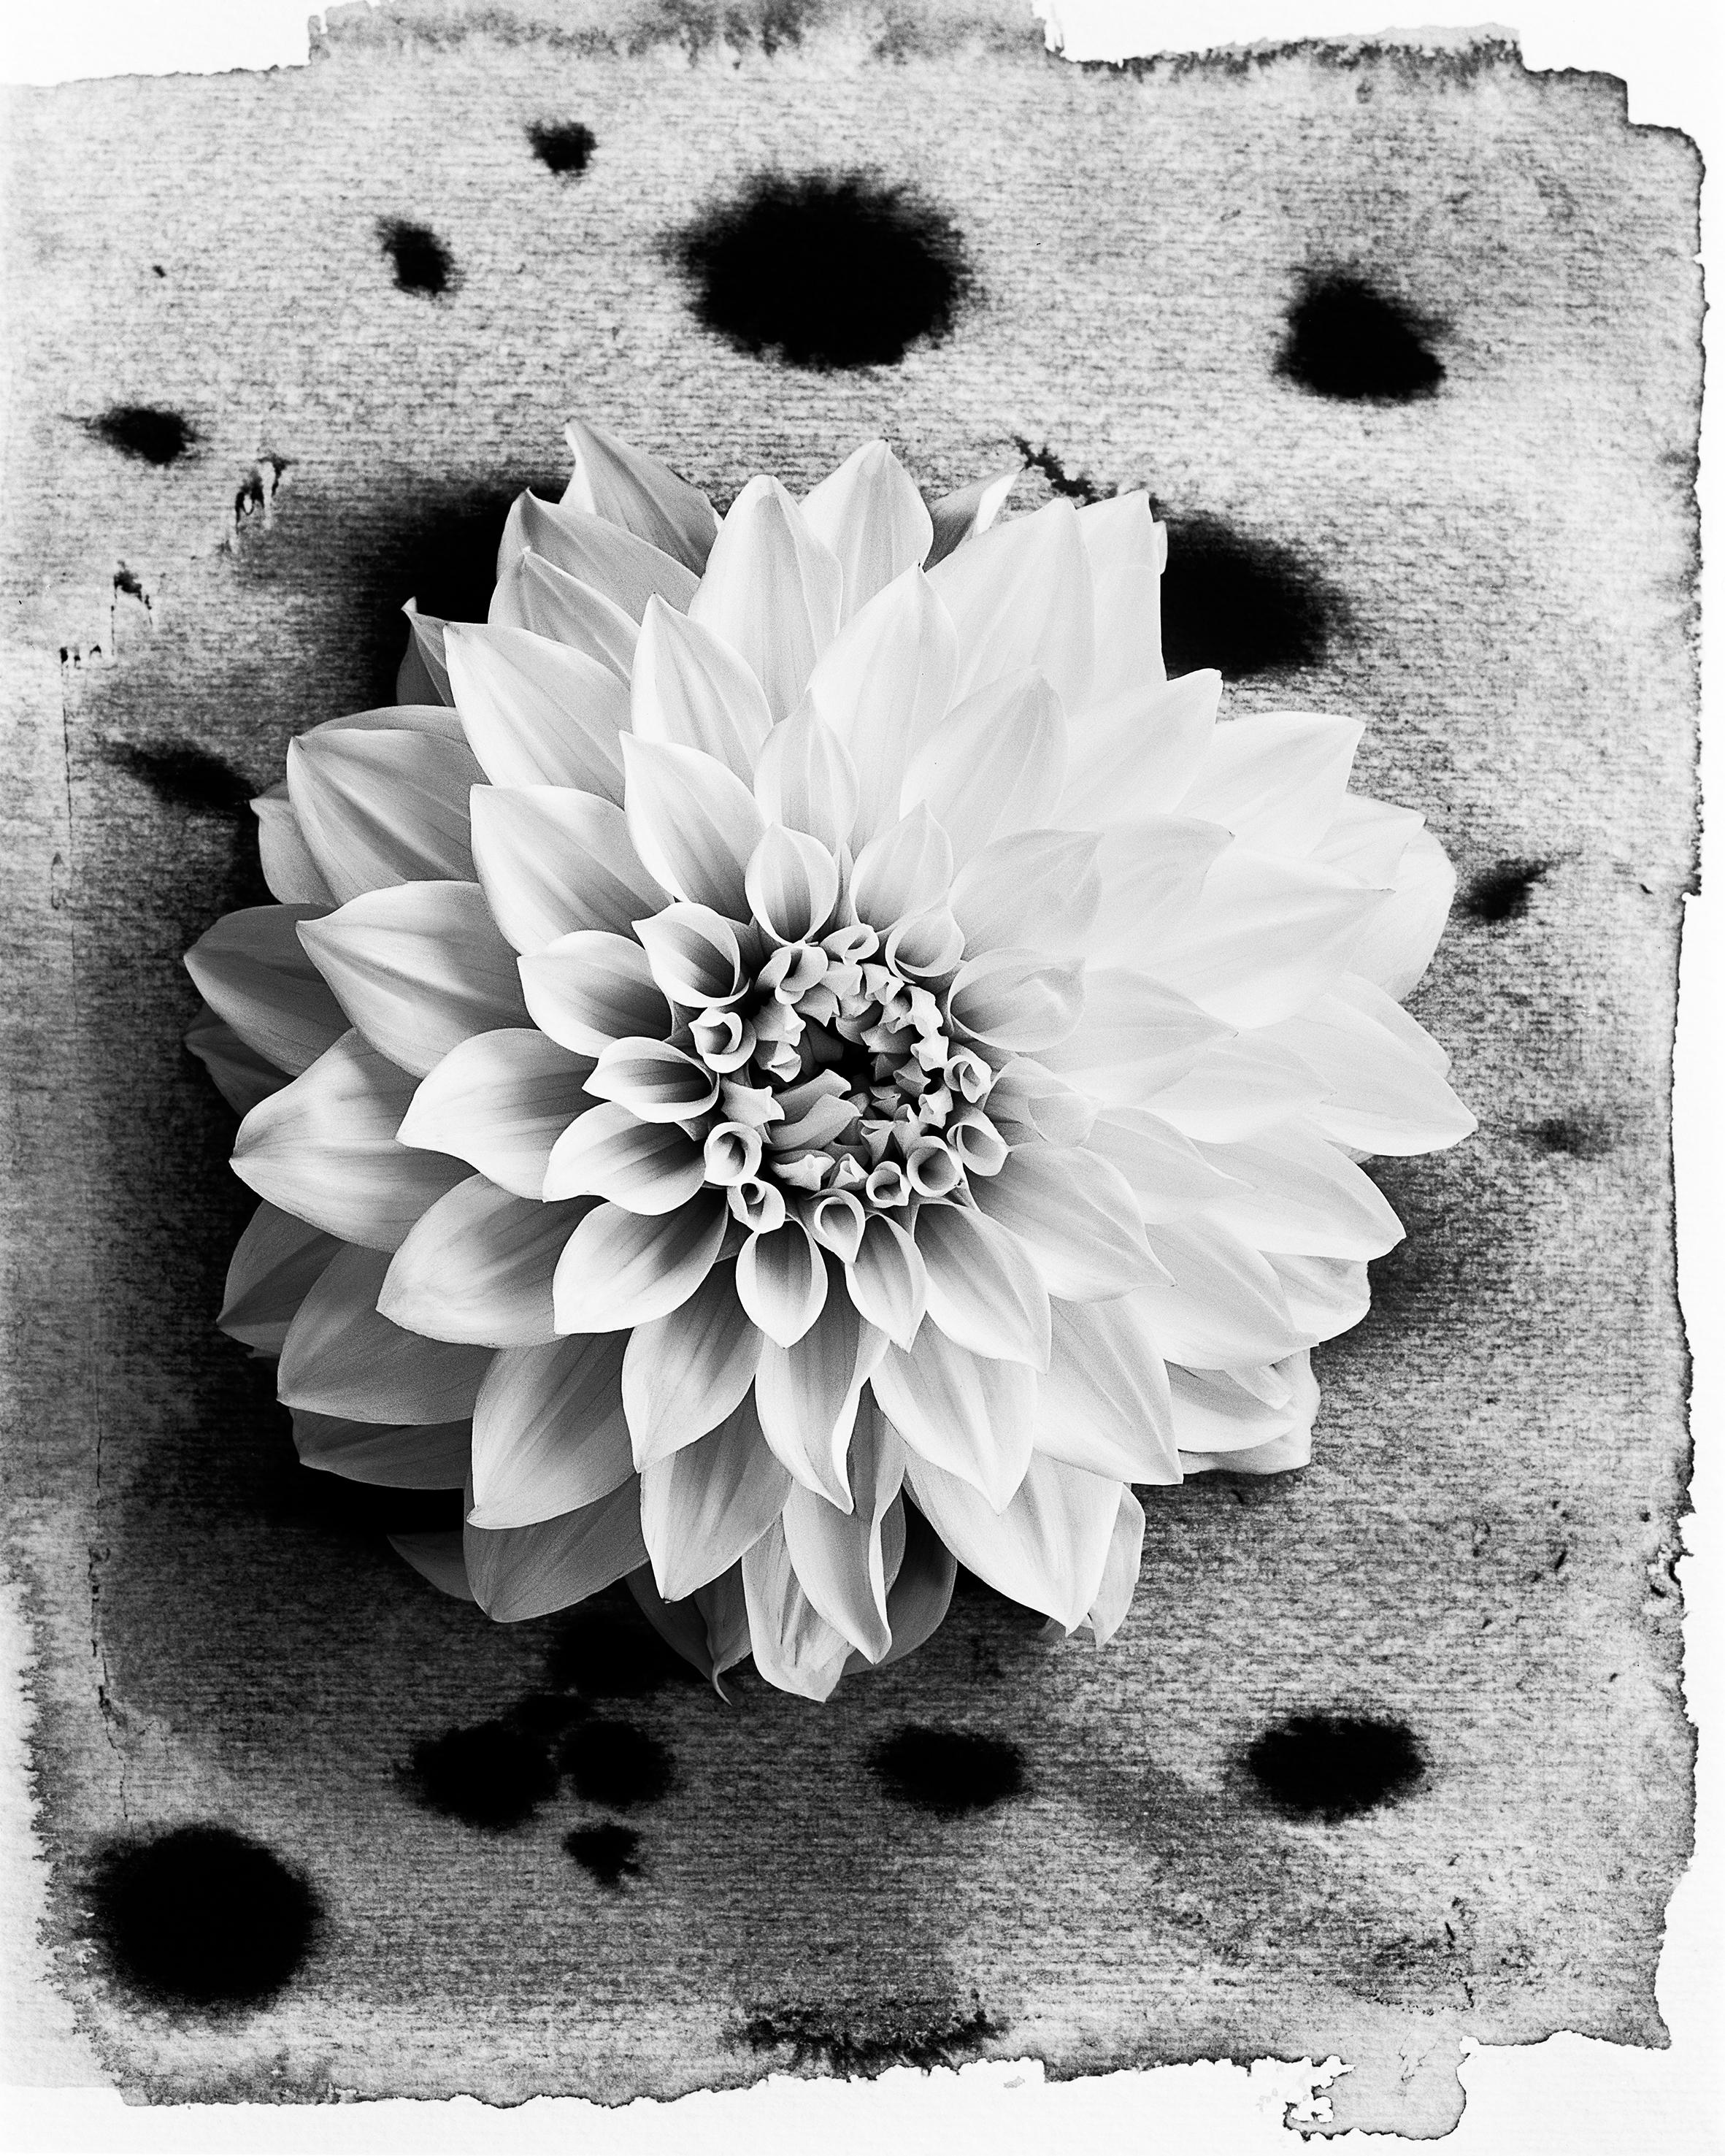 Ugne Pouwell Abstract Painting - Dahlia on Ink #3 - floral film photography in composition with ink abstraction